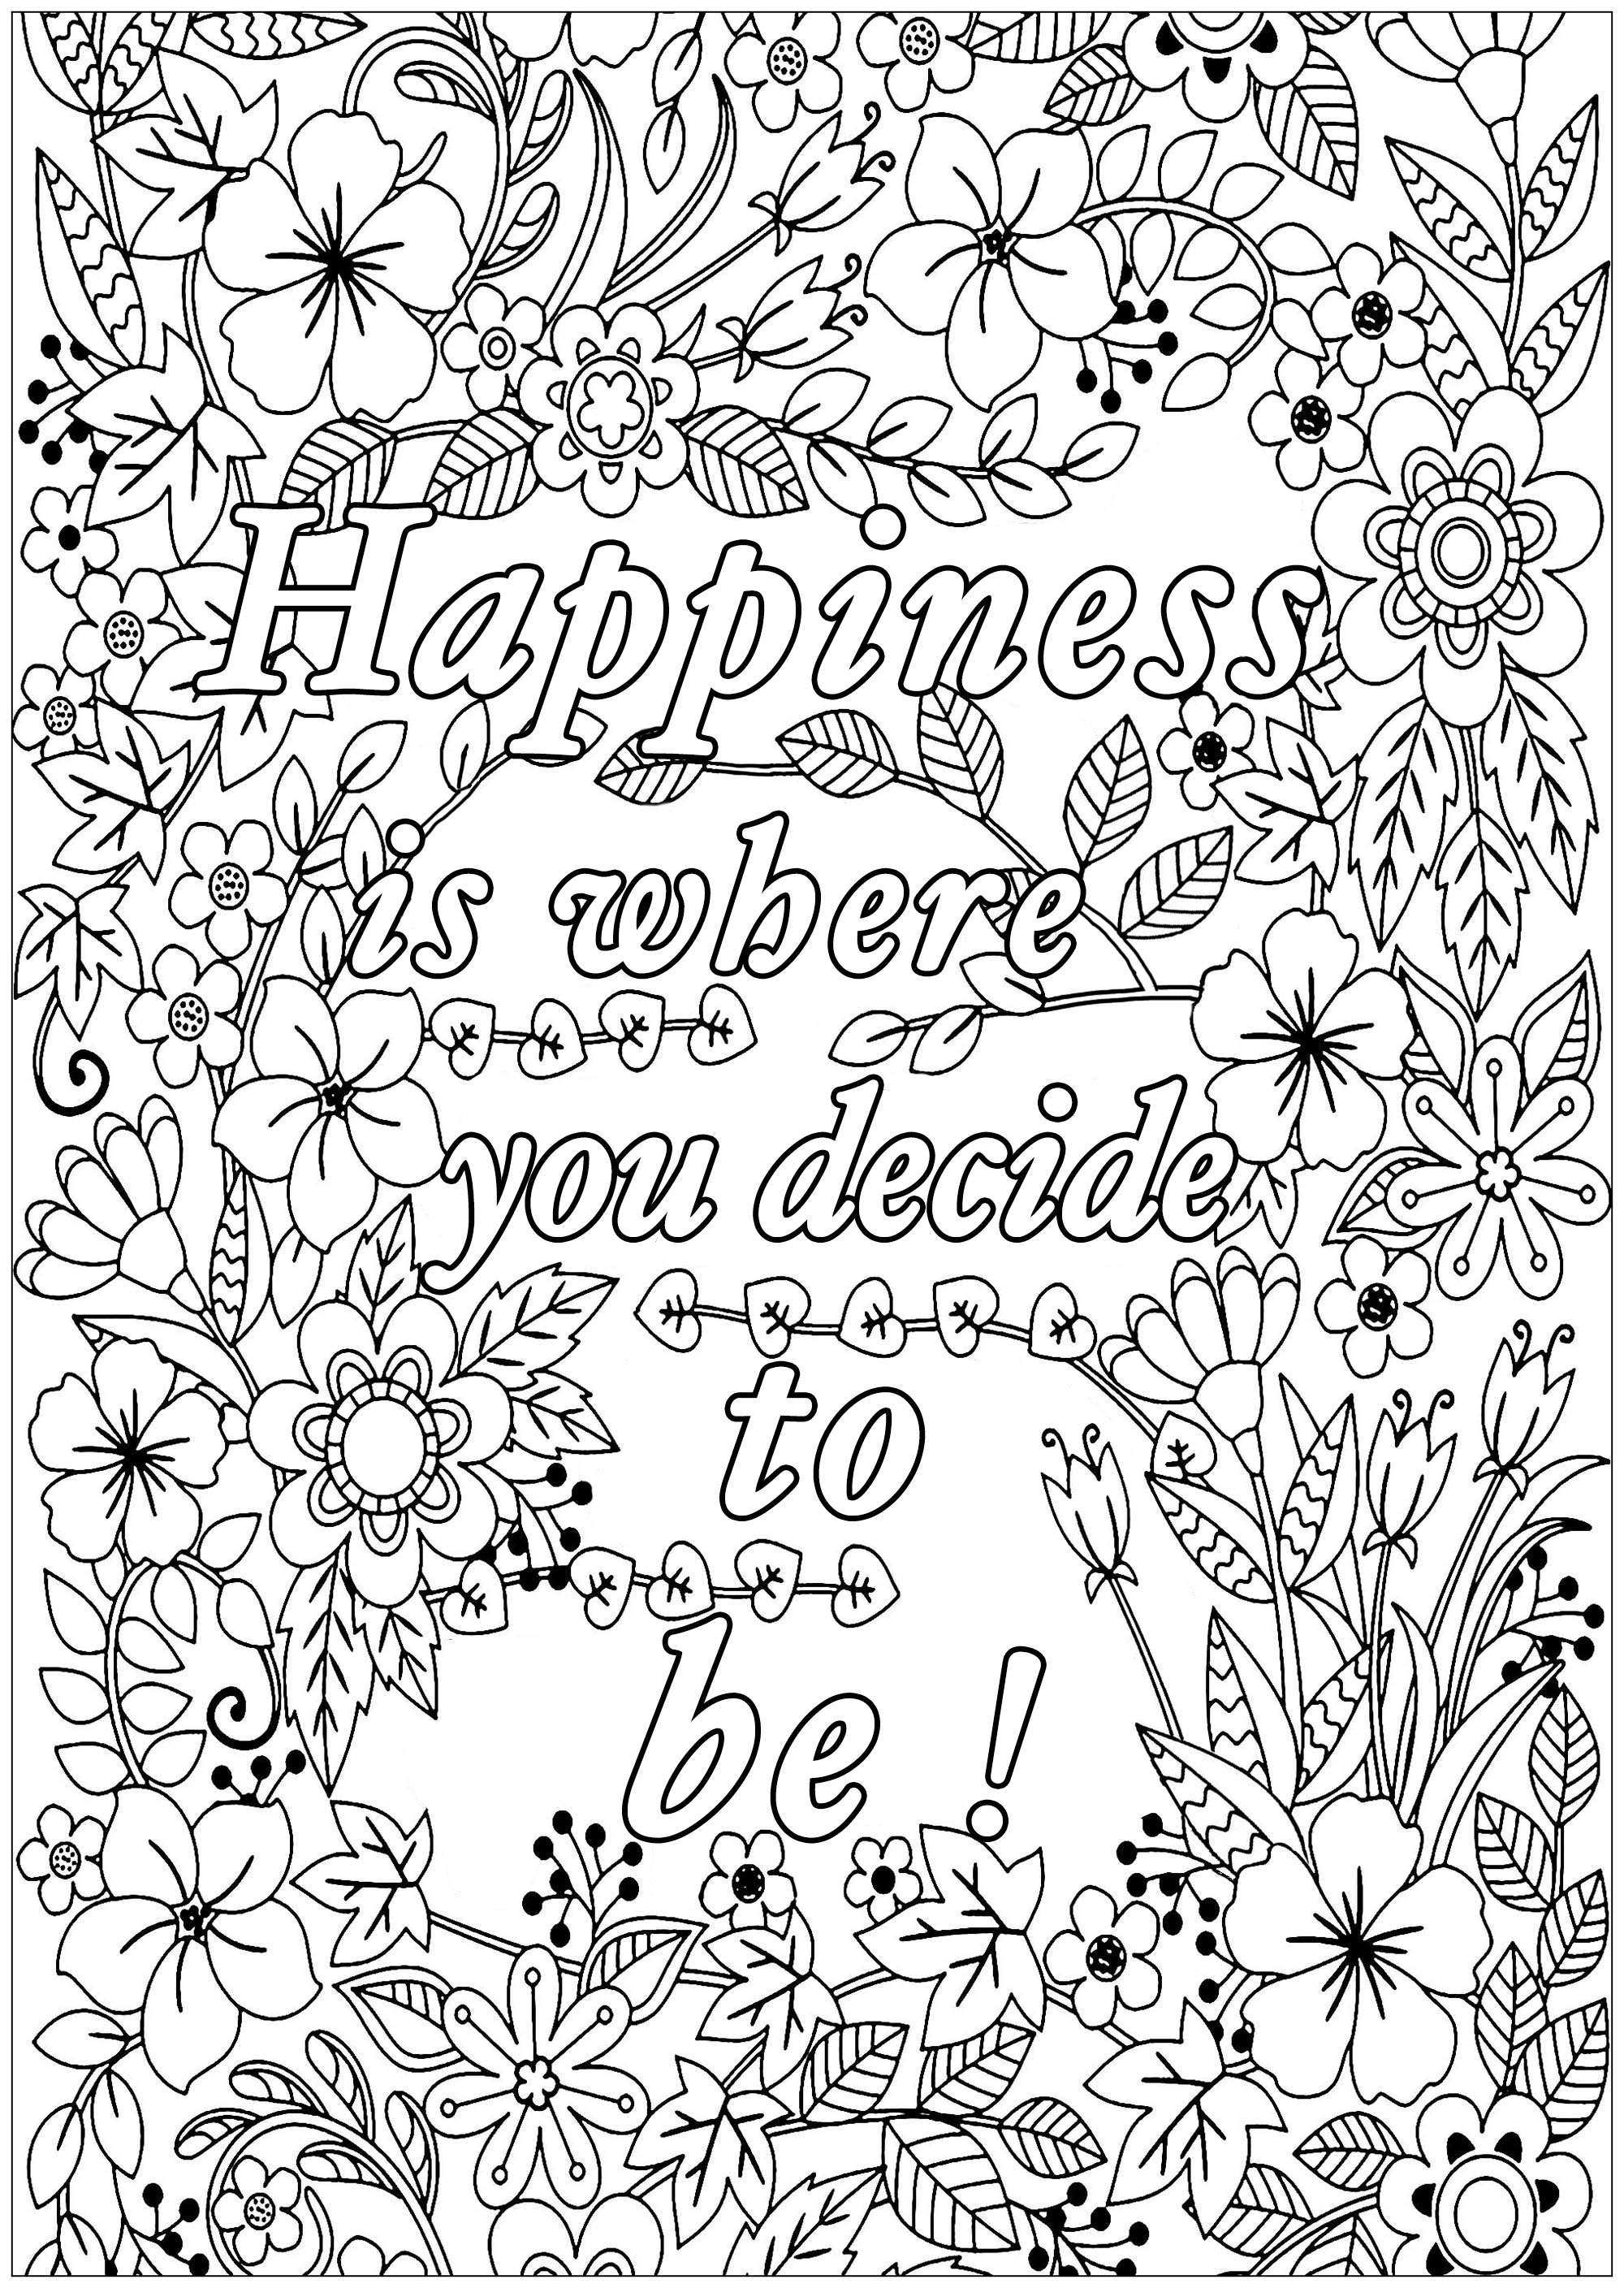 happiness-is-where-you-decide-to-be-positive-inspiring-quotes-adult